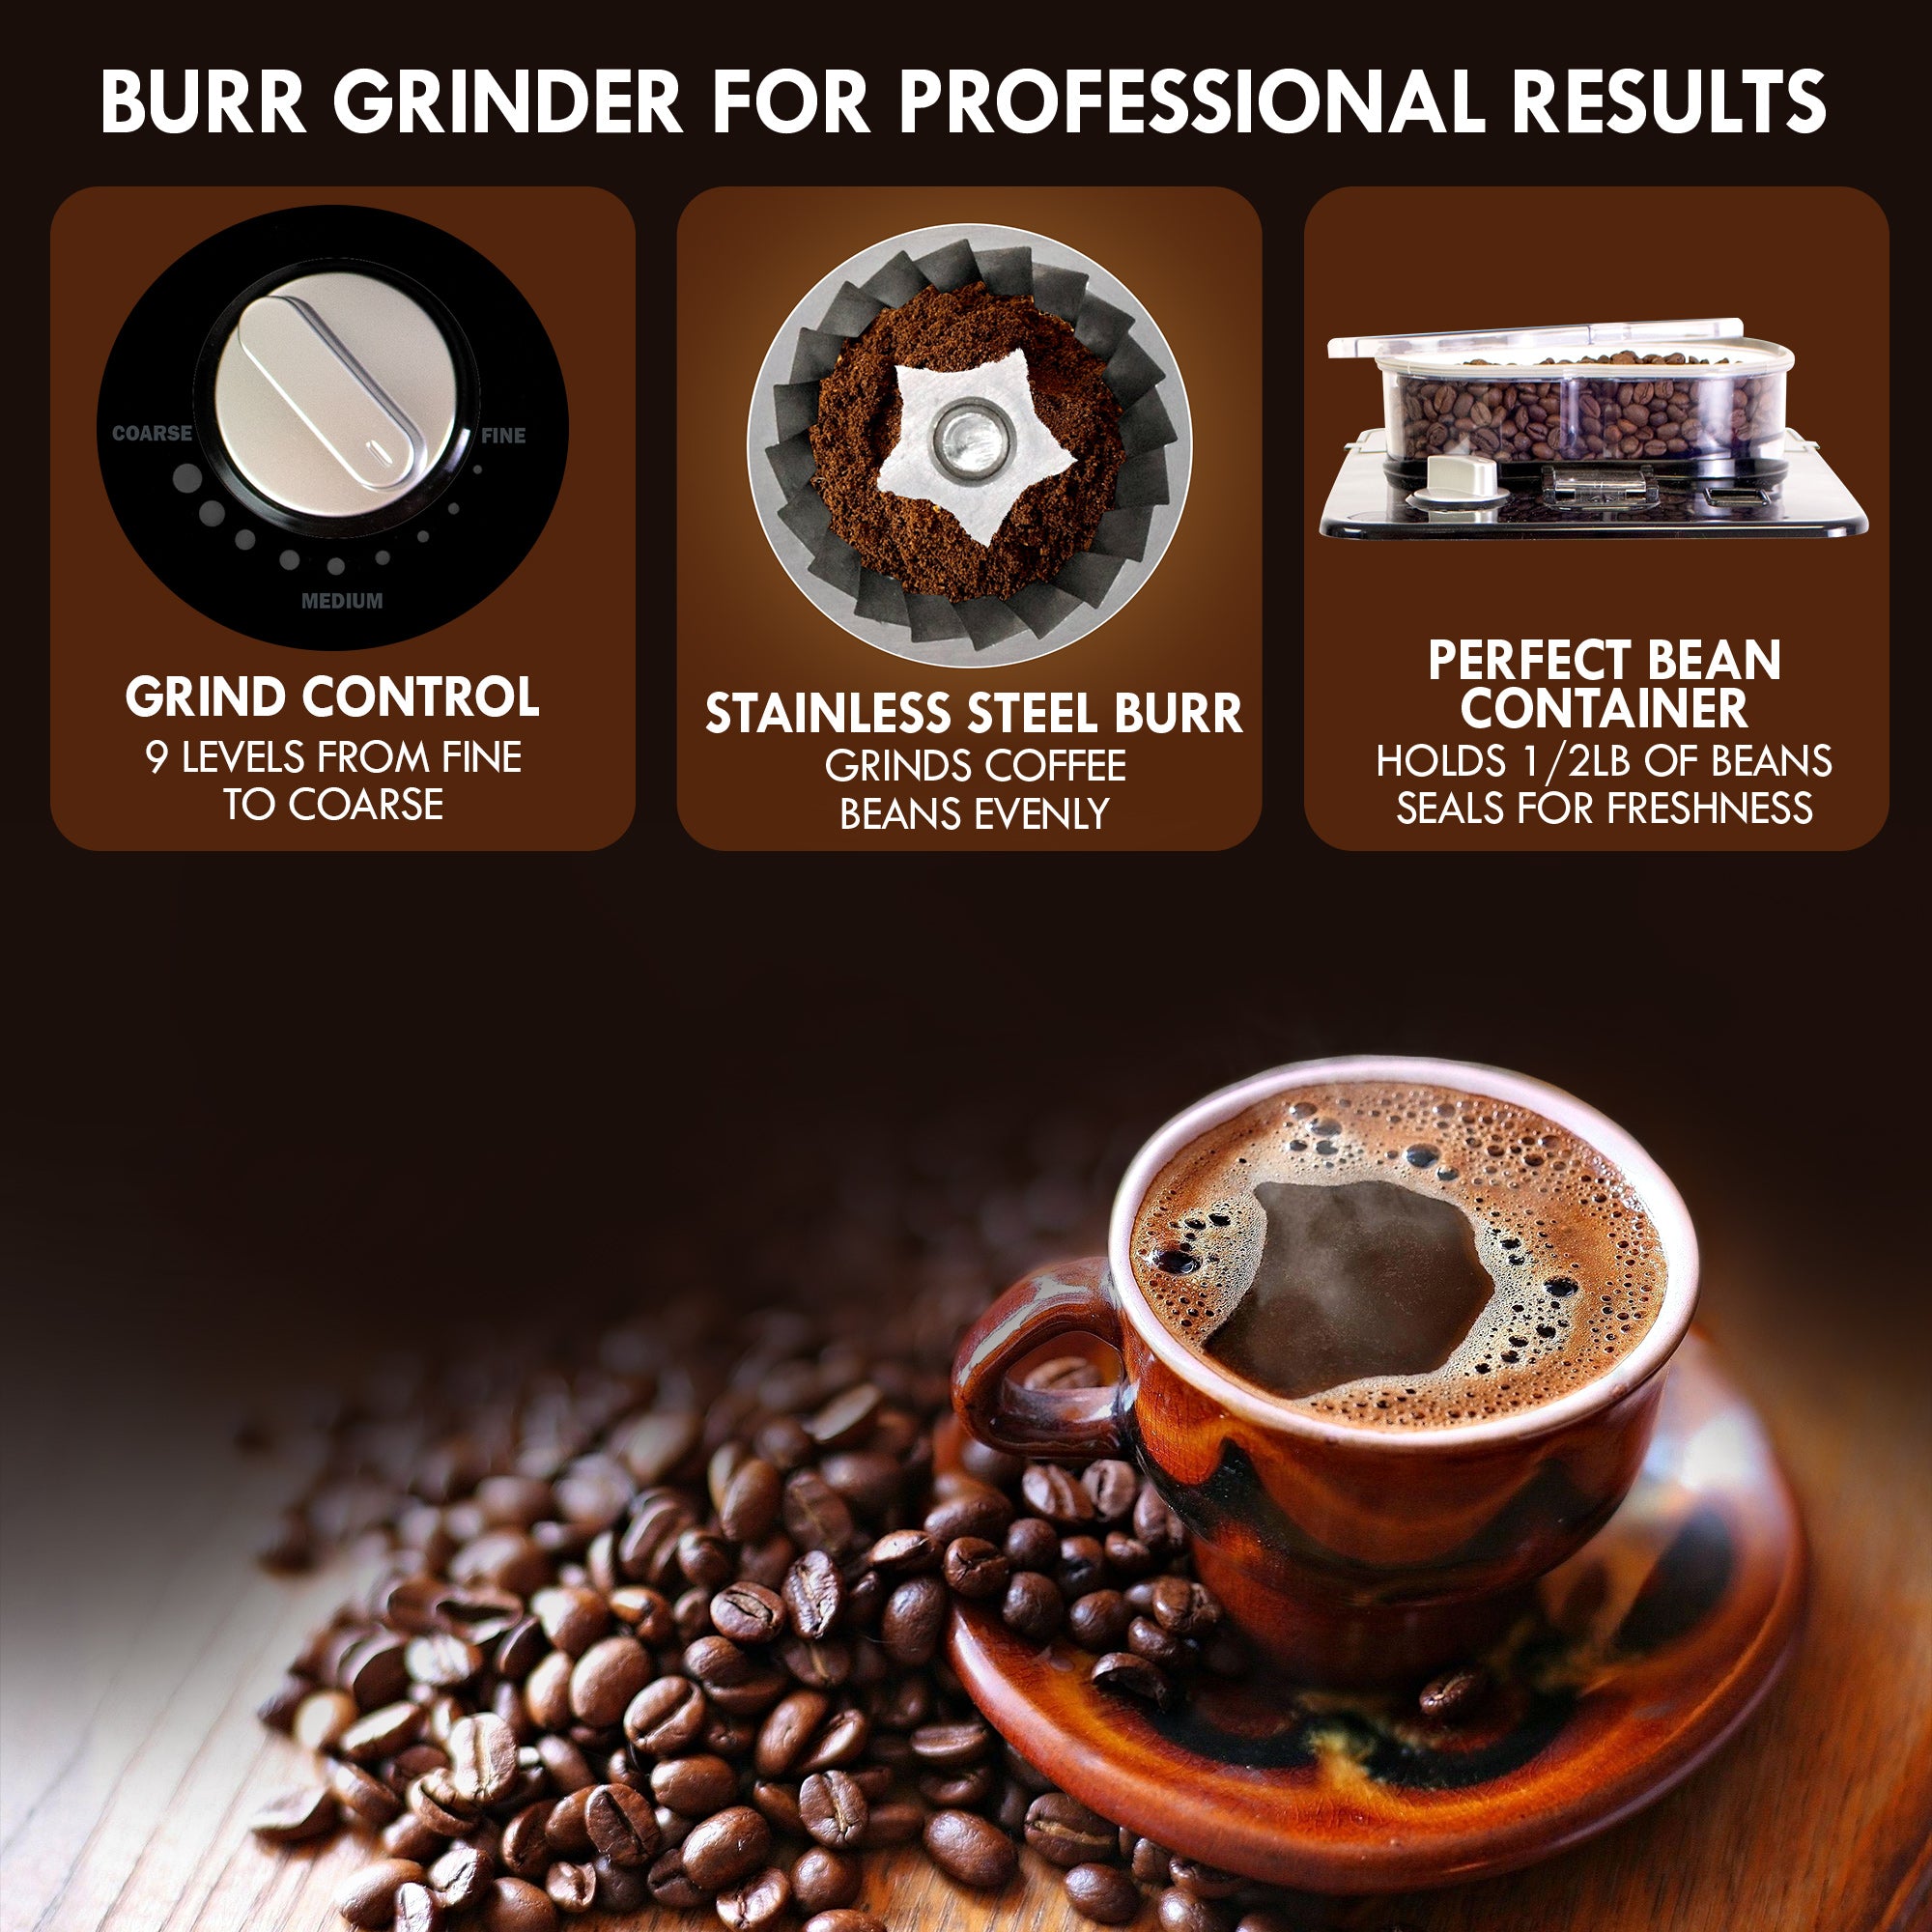 Bottom half shows a brown ceramic mug of hot coffee on a matching saucer surrounded by whole coffee beans on a dark brown wood table top. Top half shows three closeup images of the grinder parts, labeled: 1. Grind control dial - 9 levels from fine to coarse; 2. Stainless steel burr - grinds coffee beans evenly; 3. Perfect bean container - holds 1/2 lb of beans, seals for freshness. Text at the top reads, "Burr grinder for professional results" 